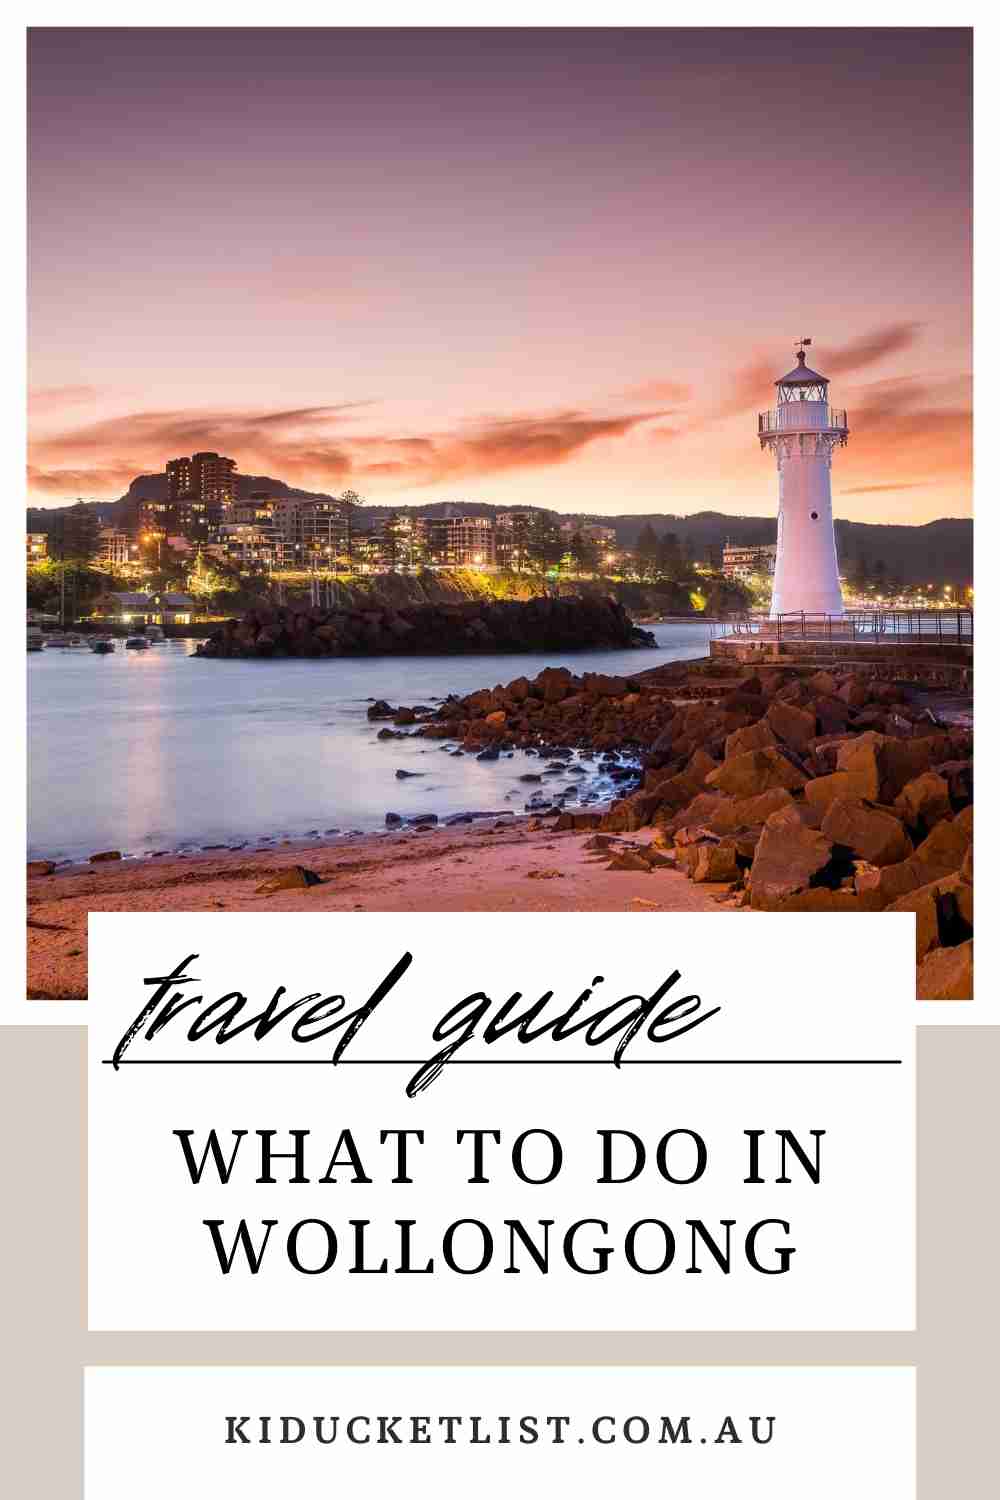 What to see and do in Wollongong